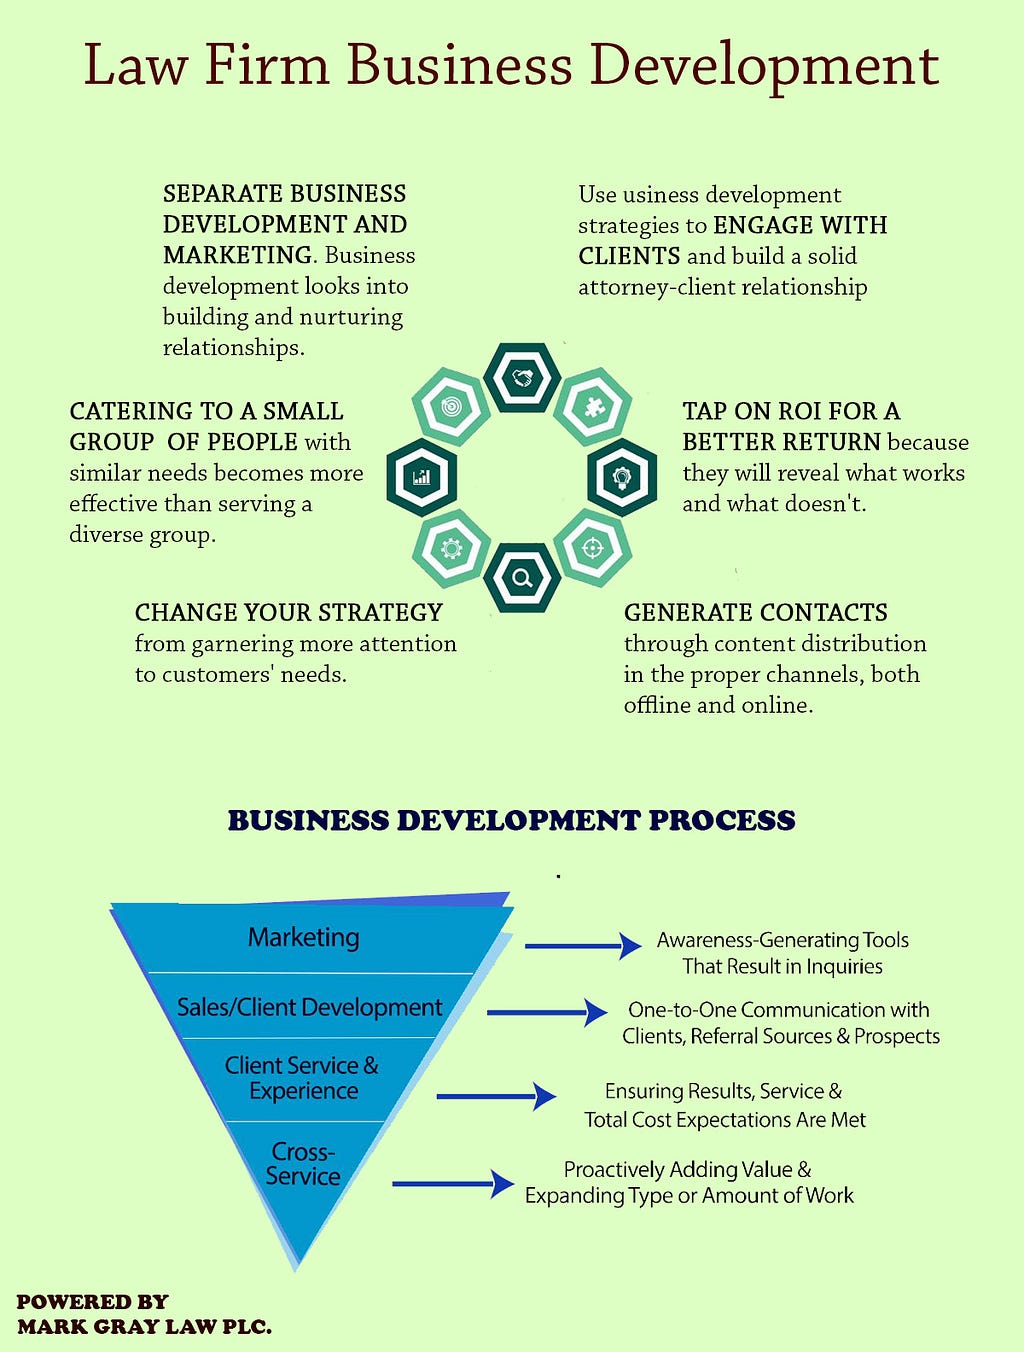 A guide to Law Firm Business Development